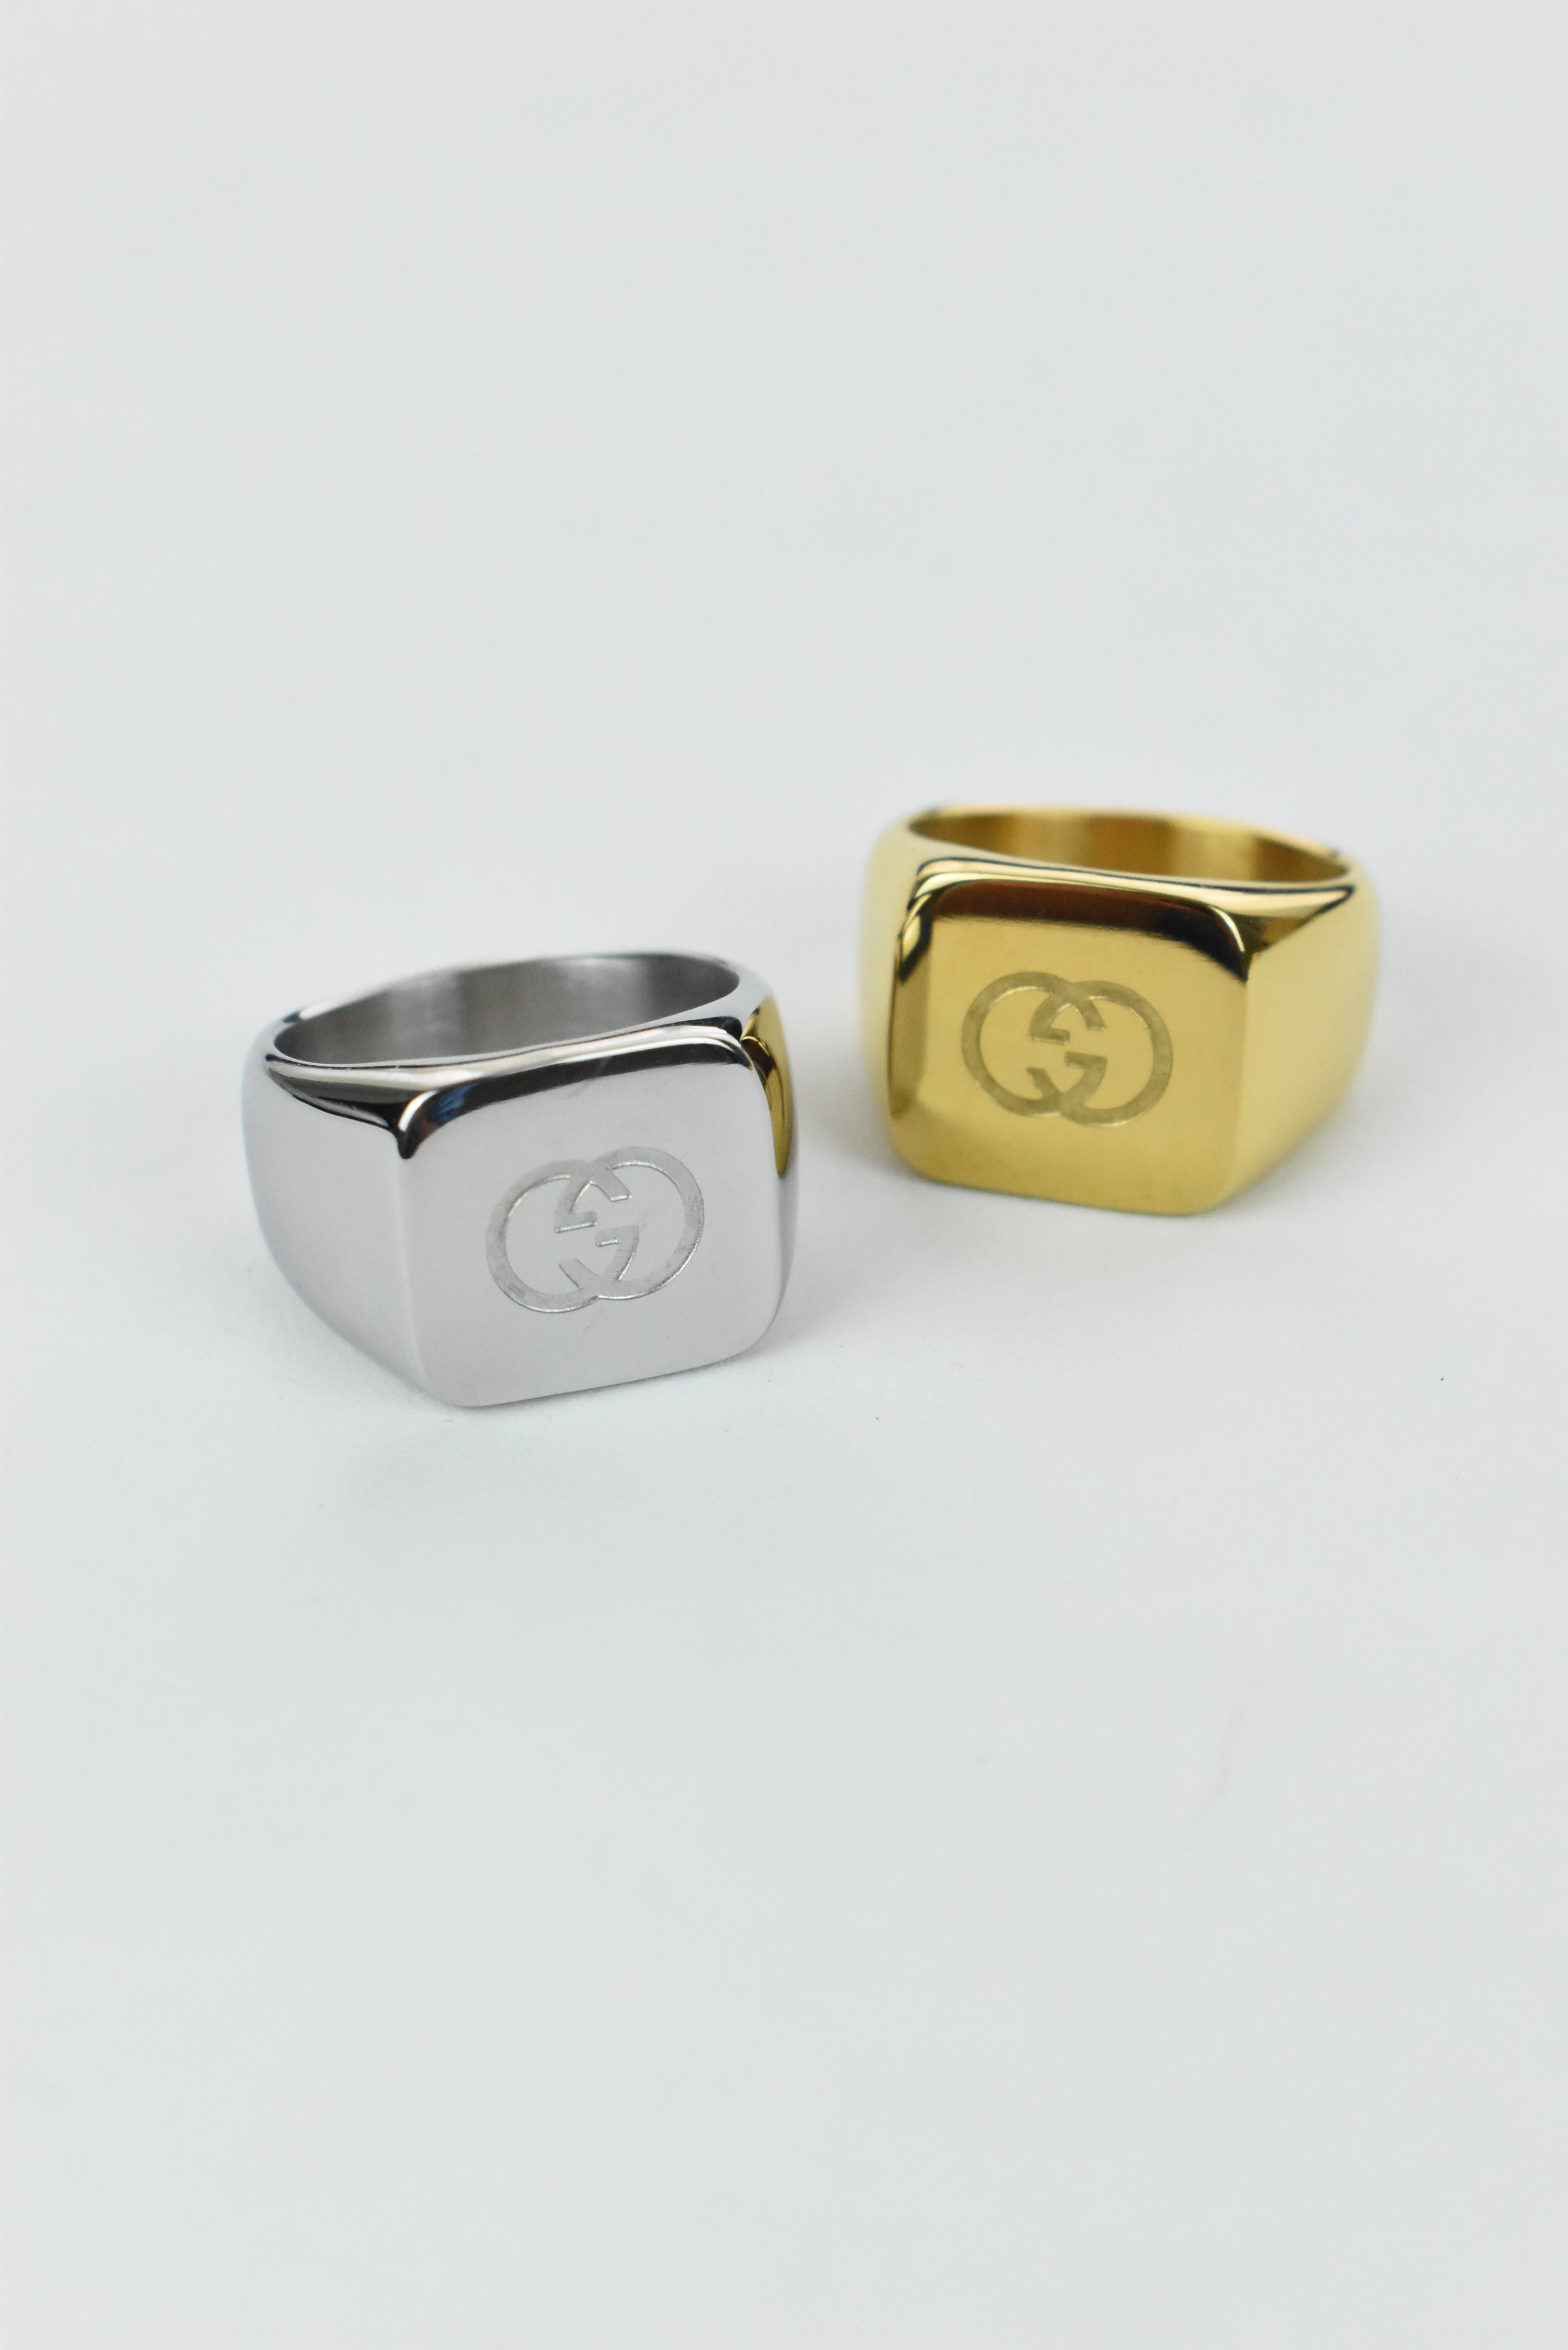 New Gucci Ring Bootleg Square Silver/Gold